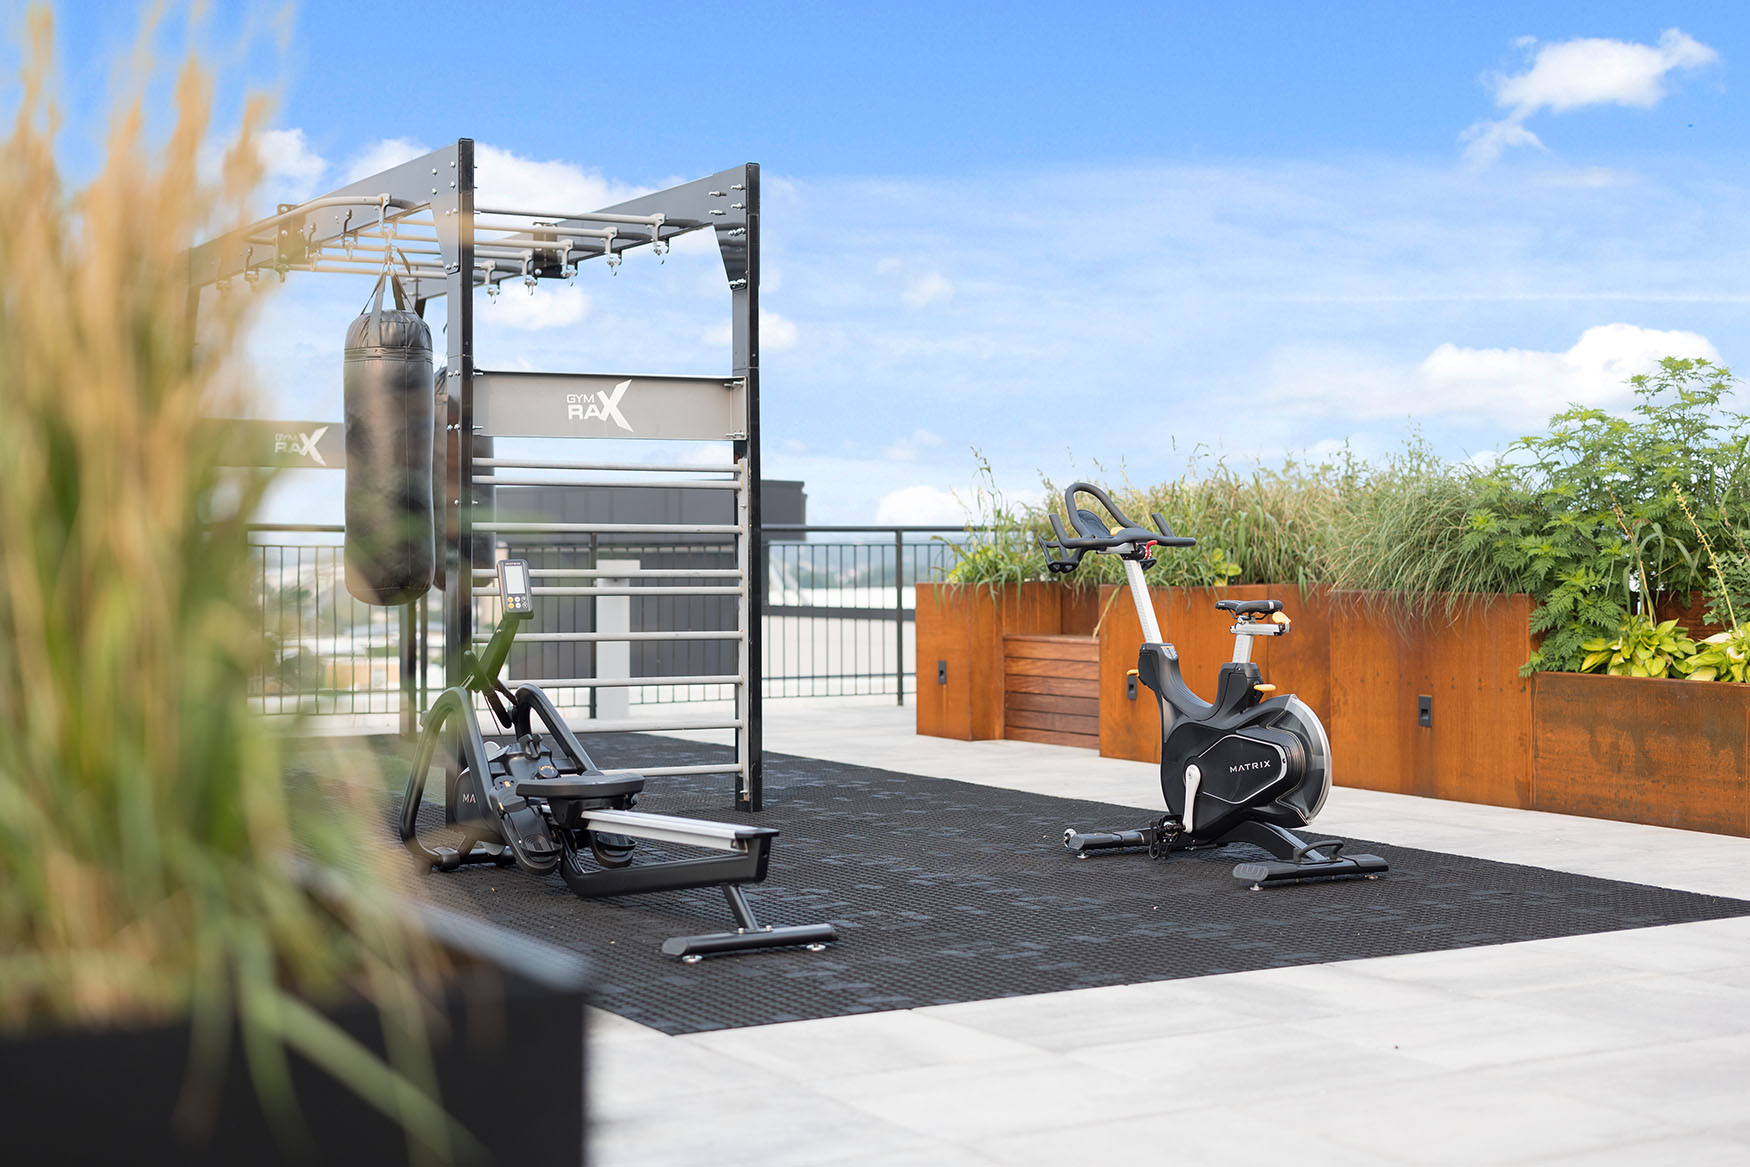 Exercise equipment on rooftop with sky in background